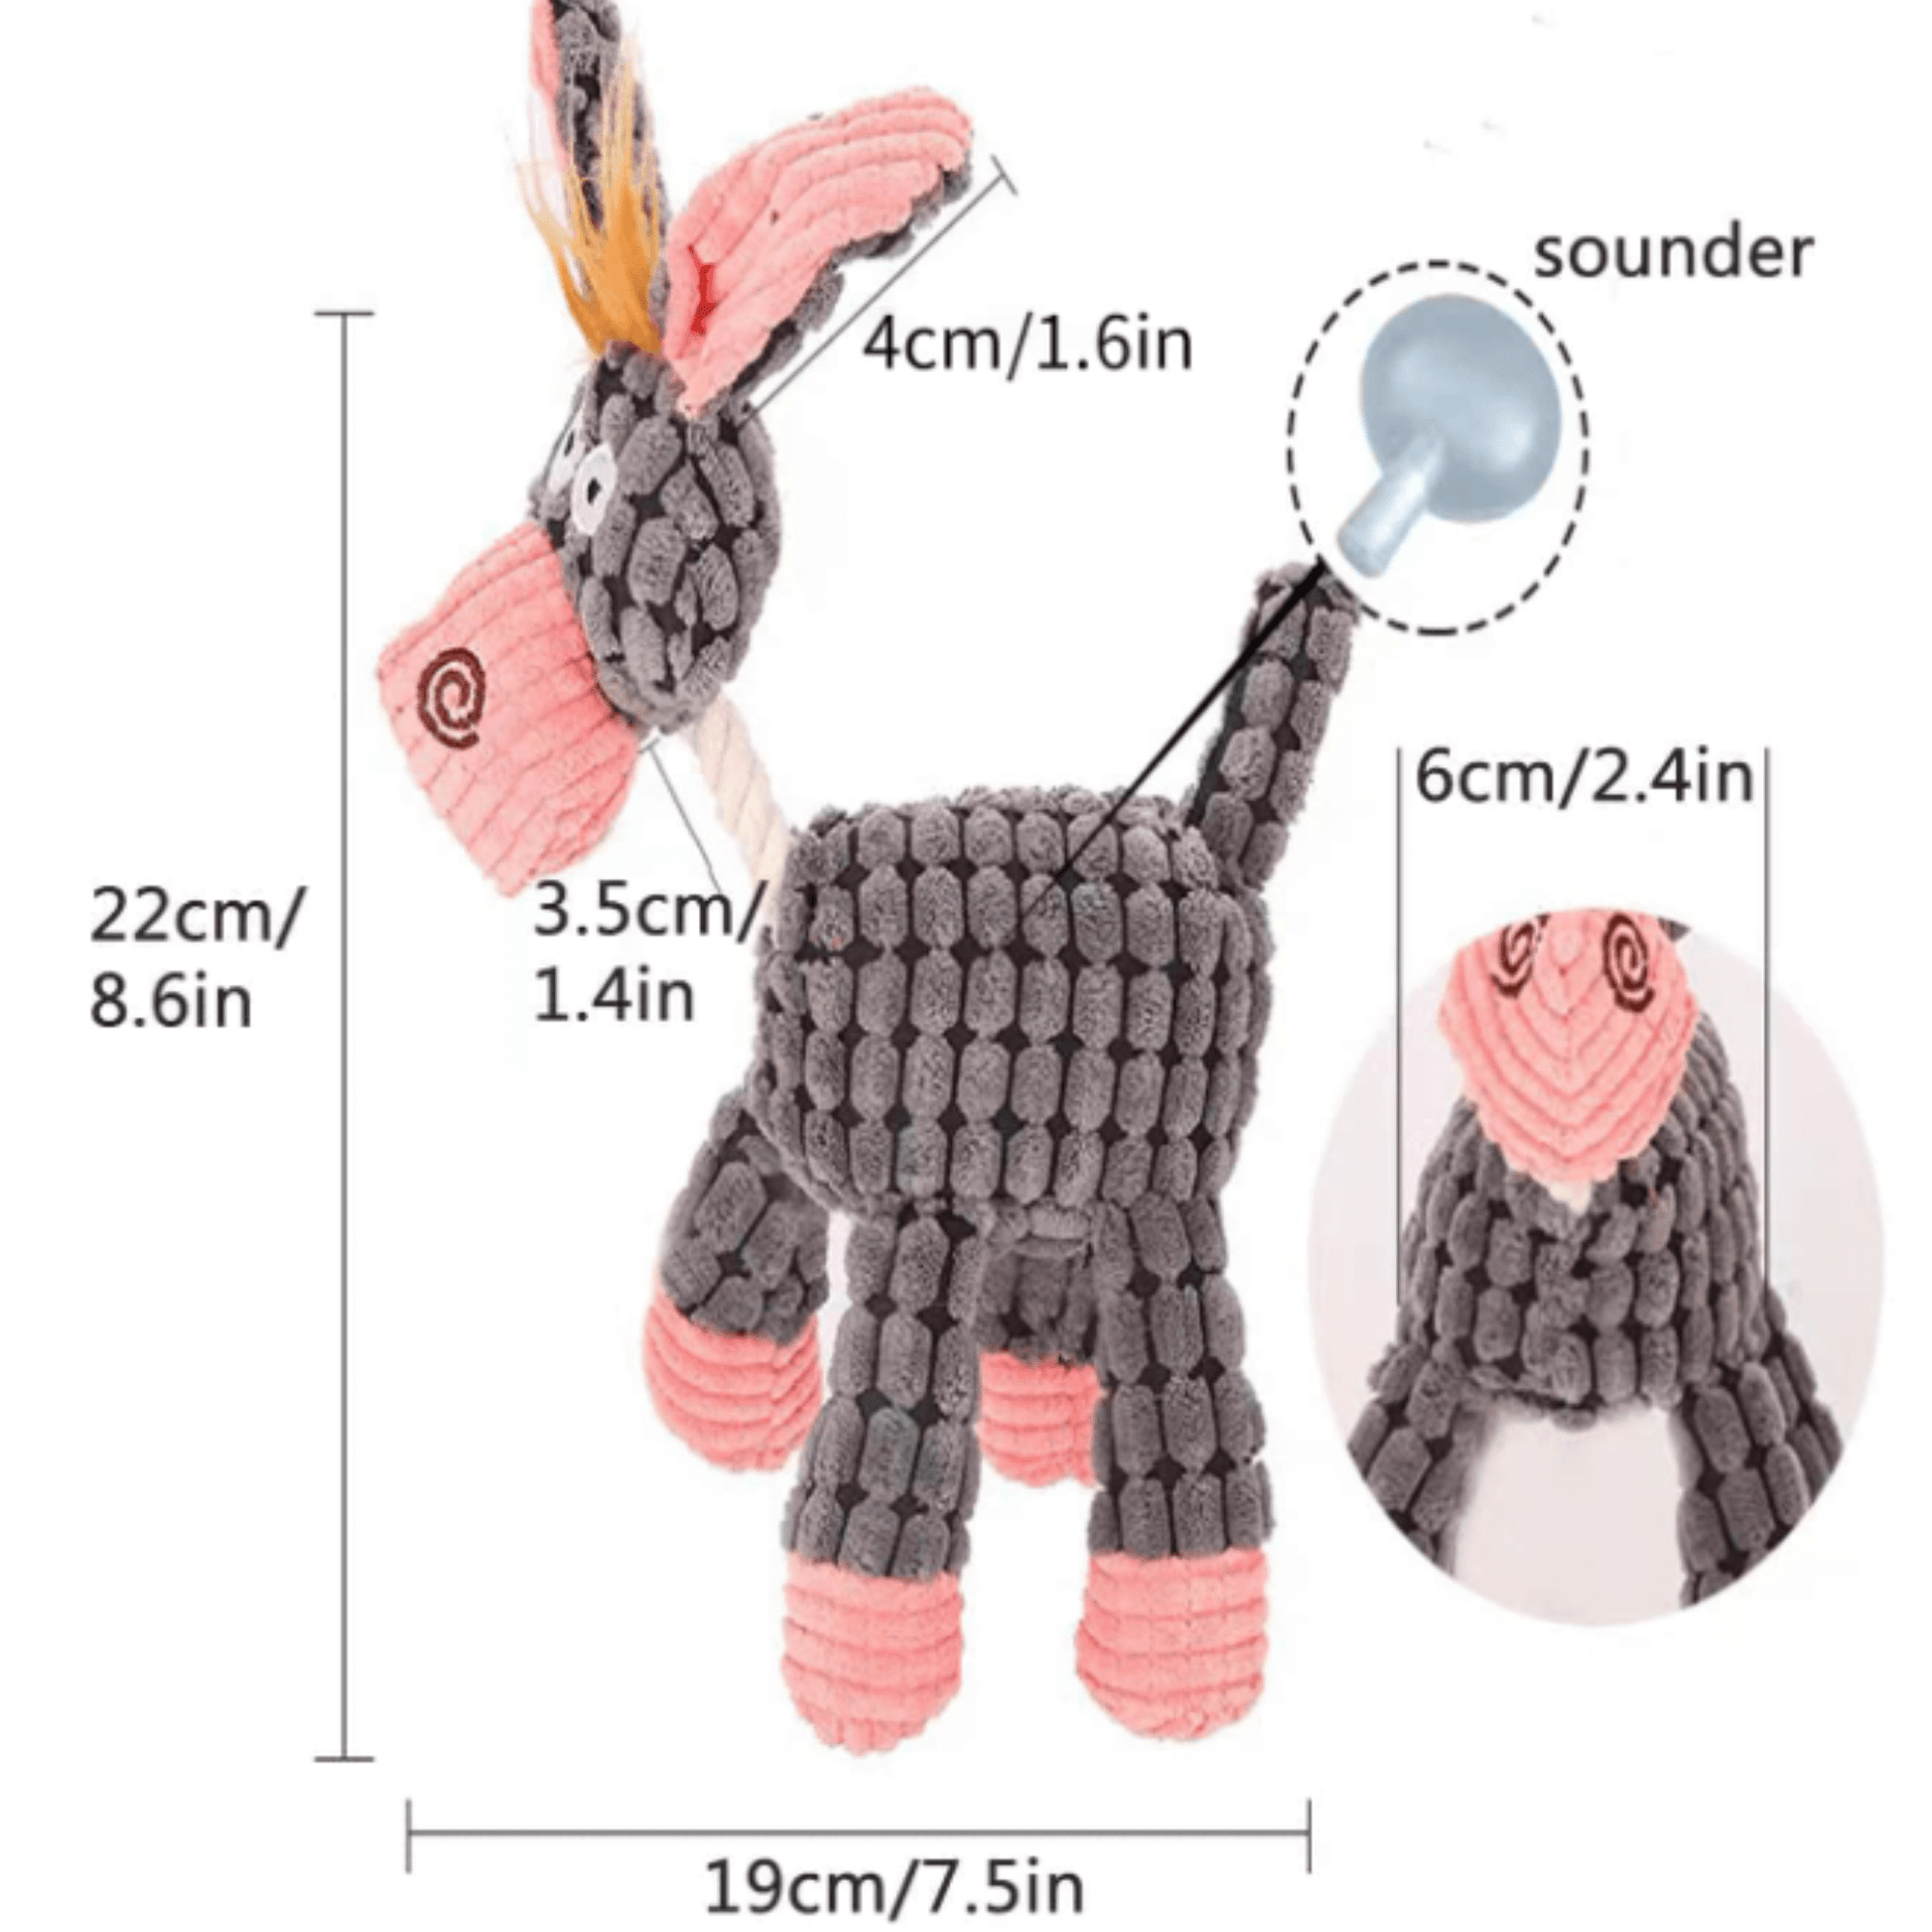 A stuffed donkey dog toy. The donkey is gray with a shorter neck and legs. Both toys have squeakers inside. The toys are made of soft, plush material and are perfect for both large and small dogs.